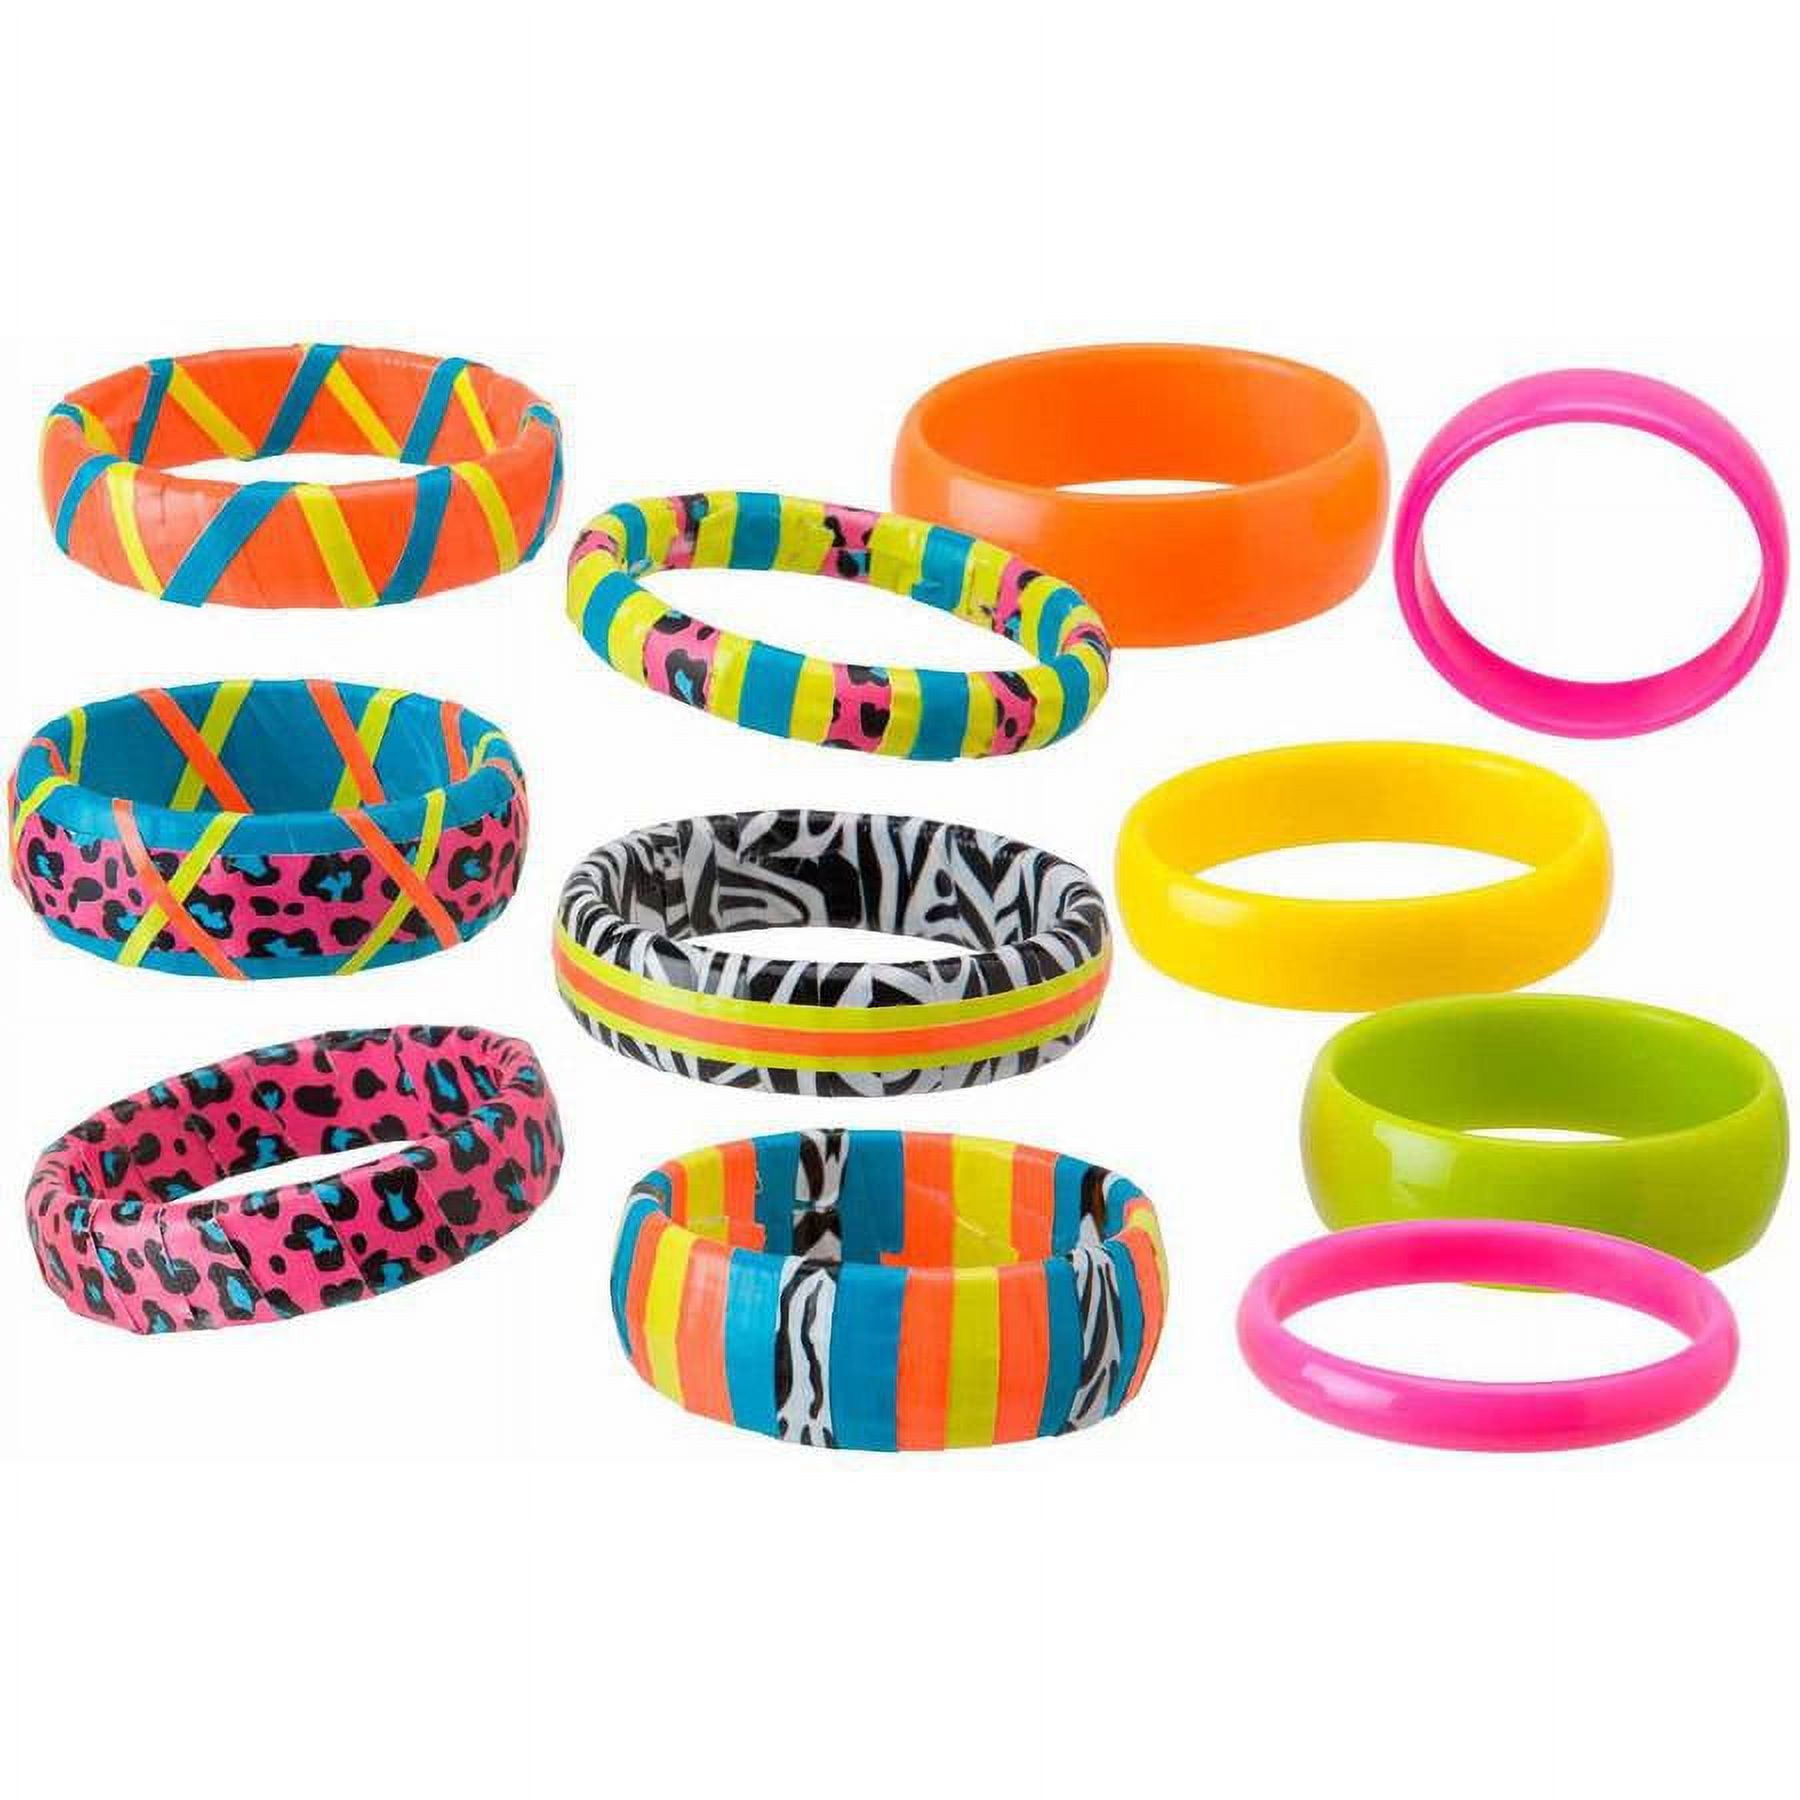 ALEX Toys Craft Duct Tape Bangles - image 5 of 5